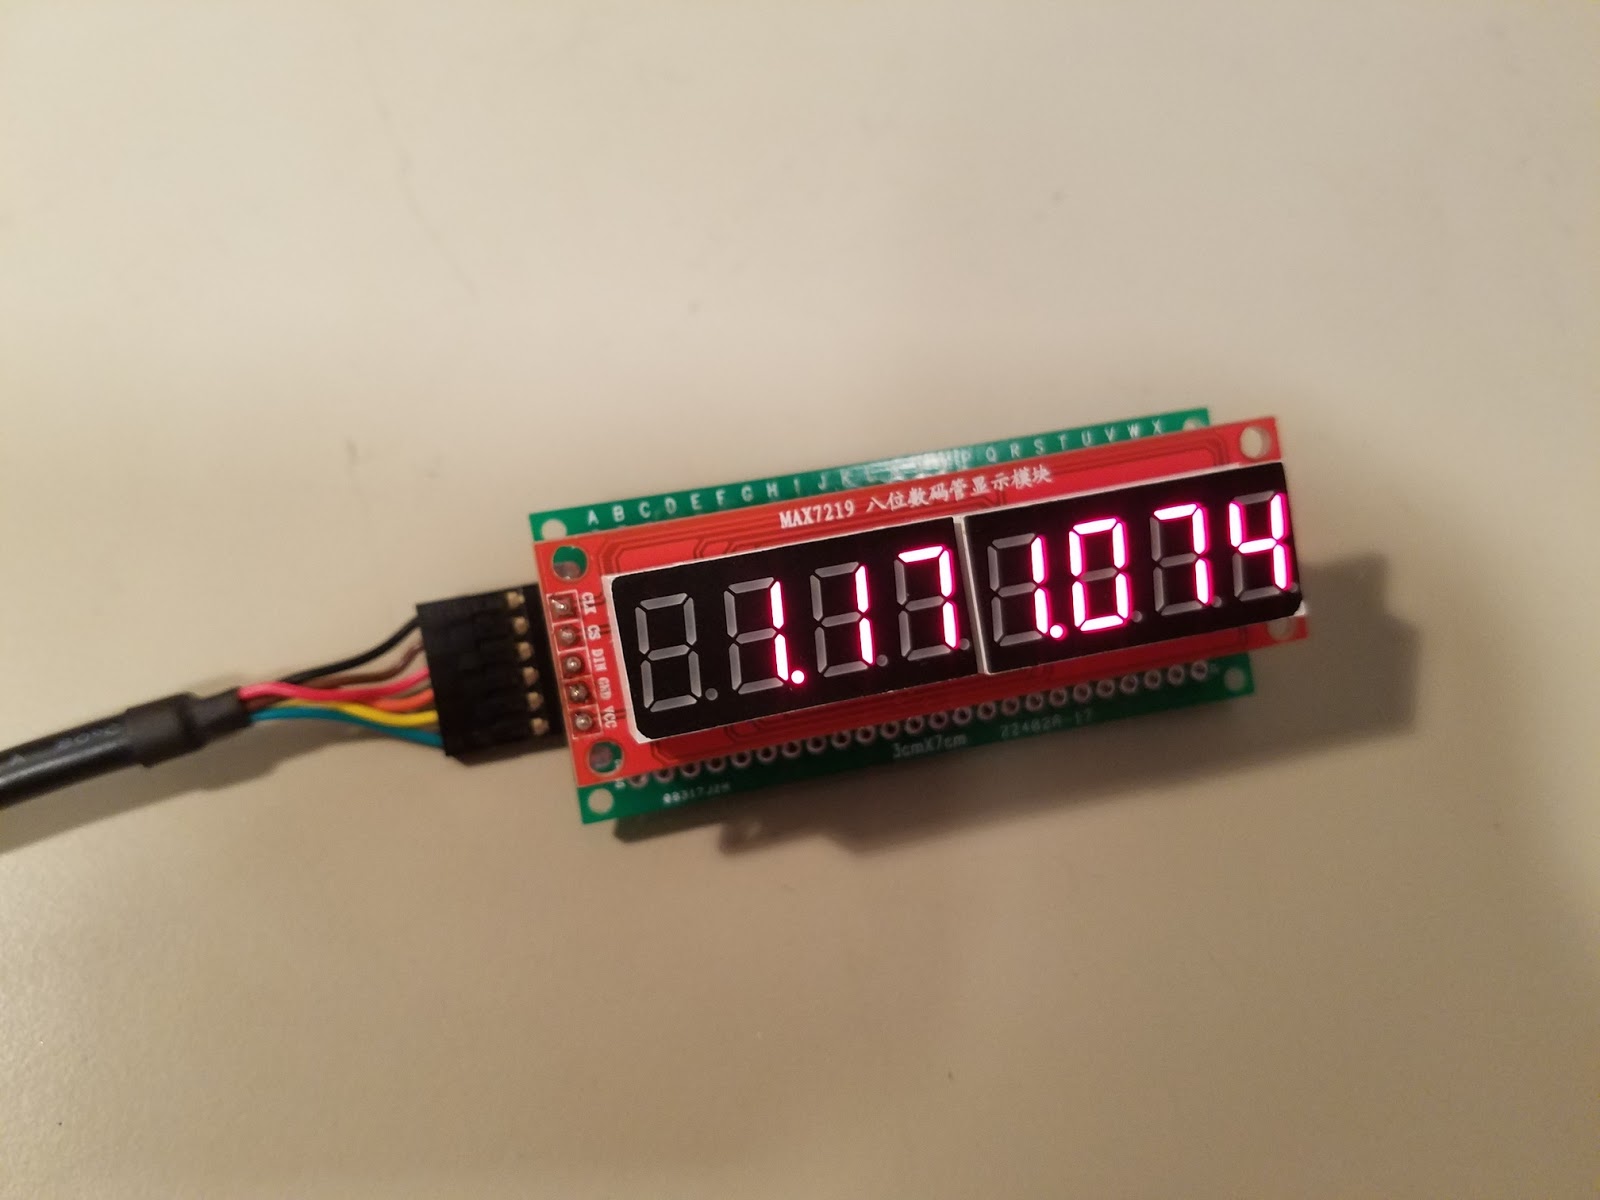 Youtube Subscriber Counter Led